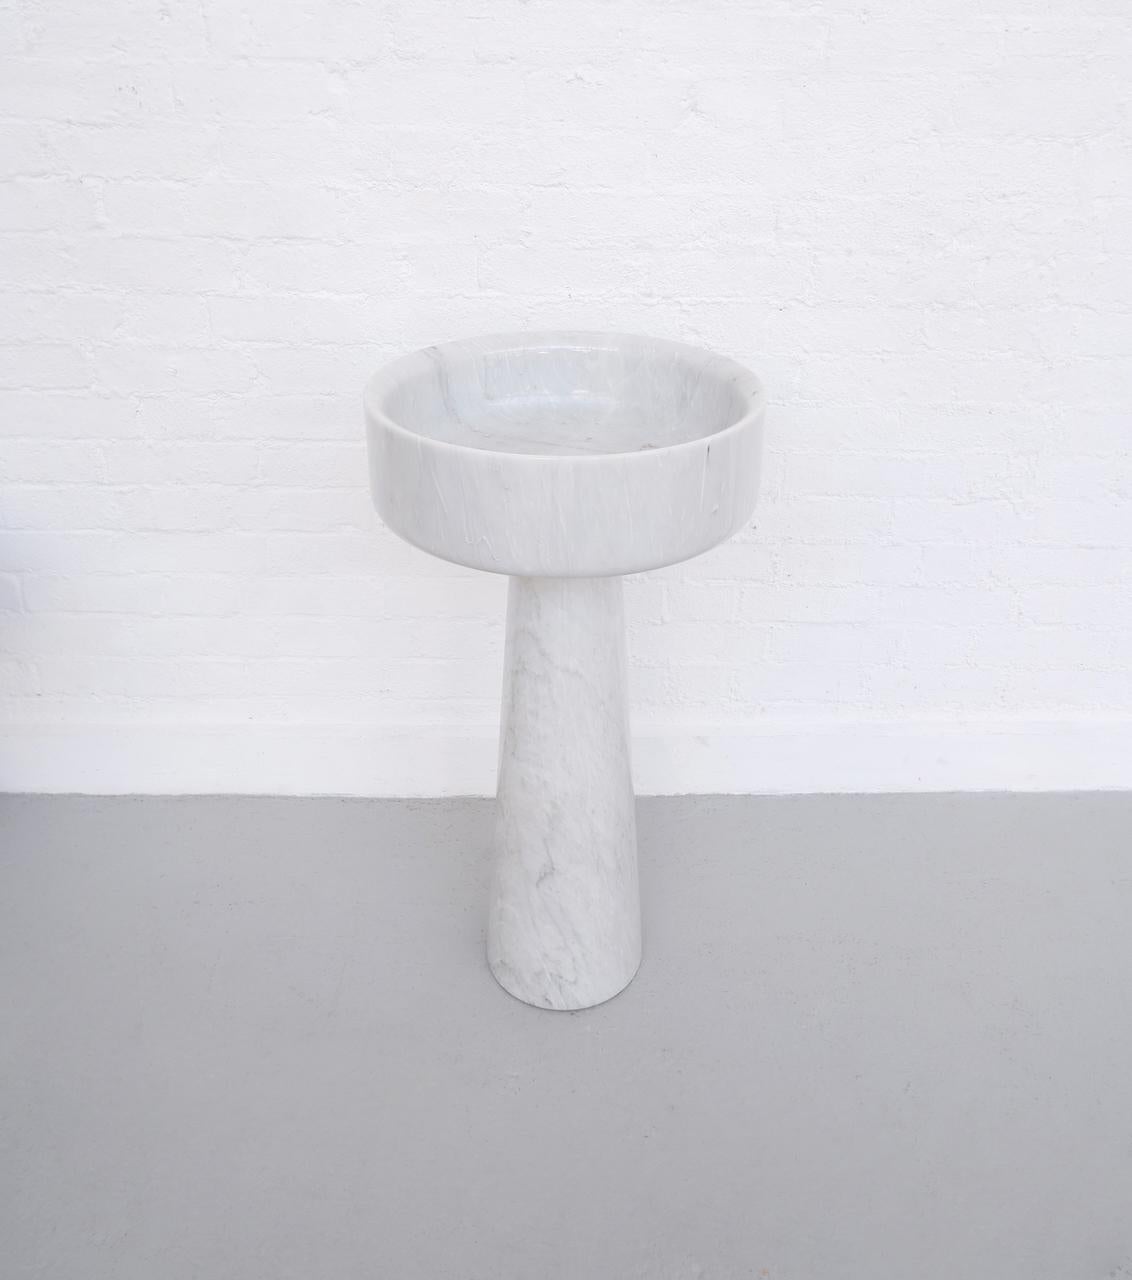 White Carrara marble planter designed by Angelo Mangiarotti, the Italian architect and designer synonymous with functional design in marble and stone. An icon of Italian craftsmanship his work is revered for its humanistic and inventive simplicity.